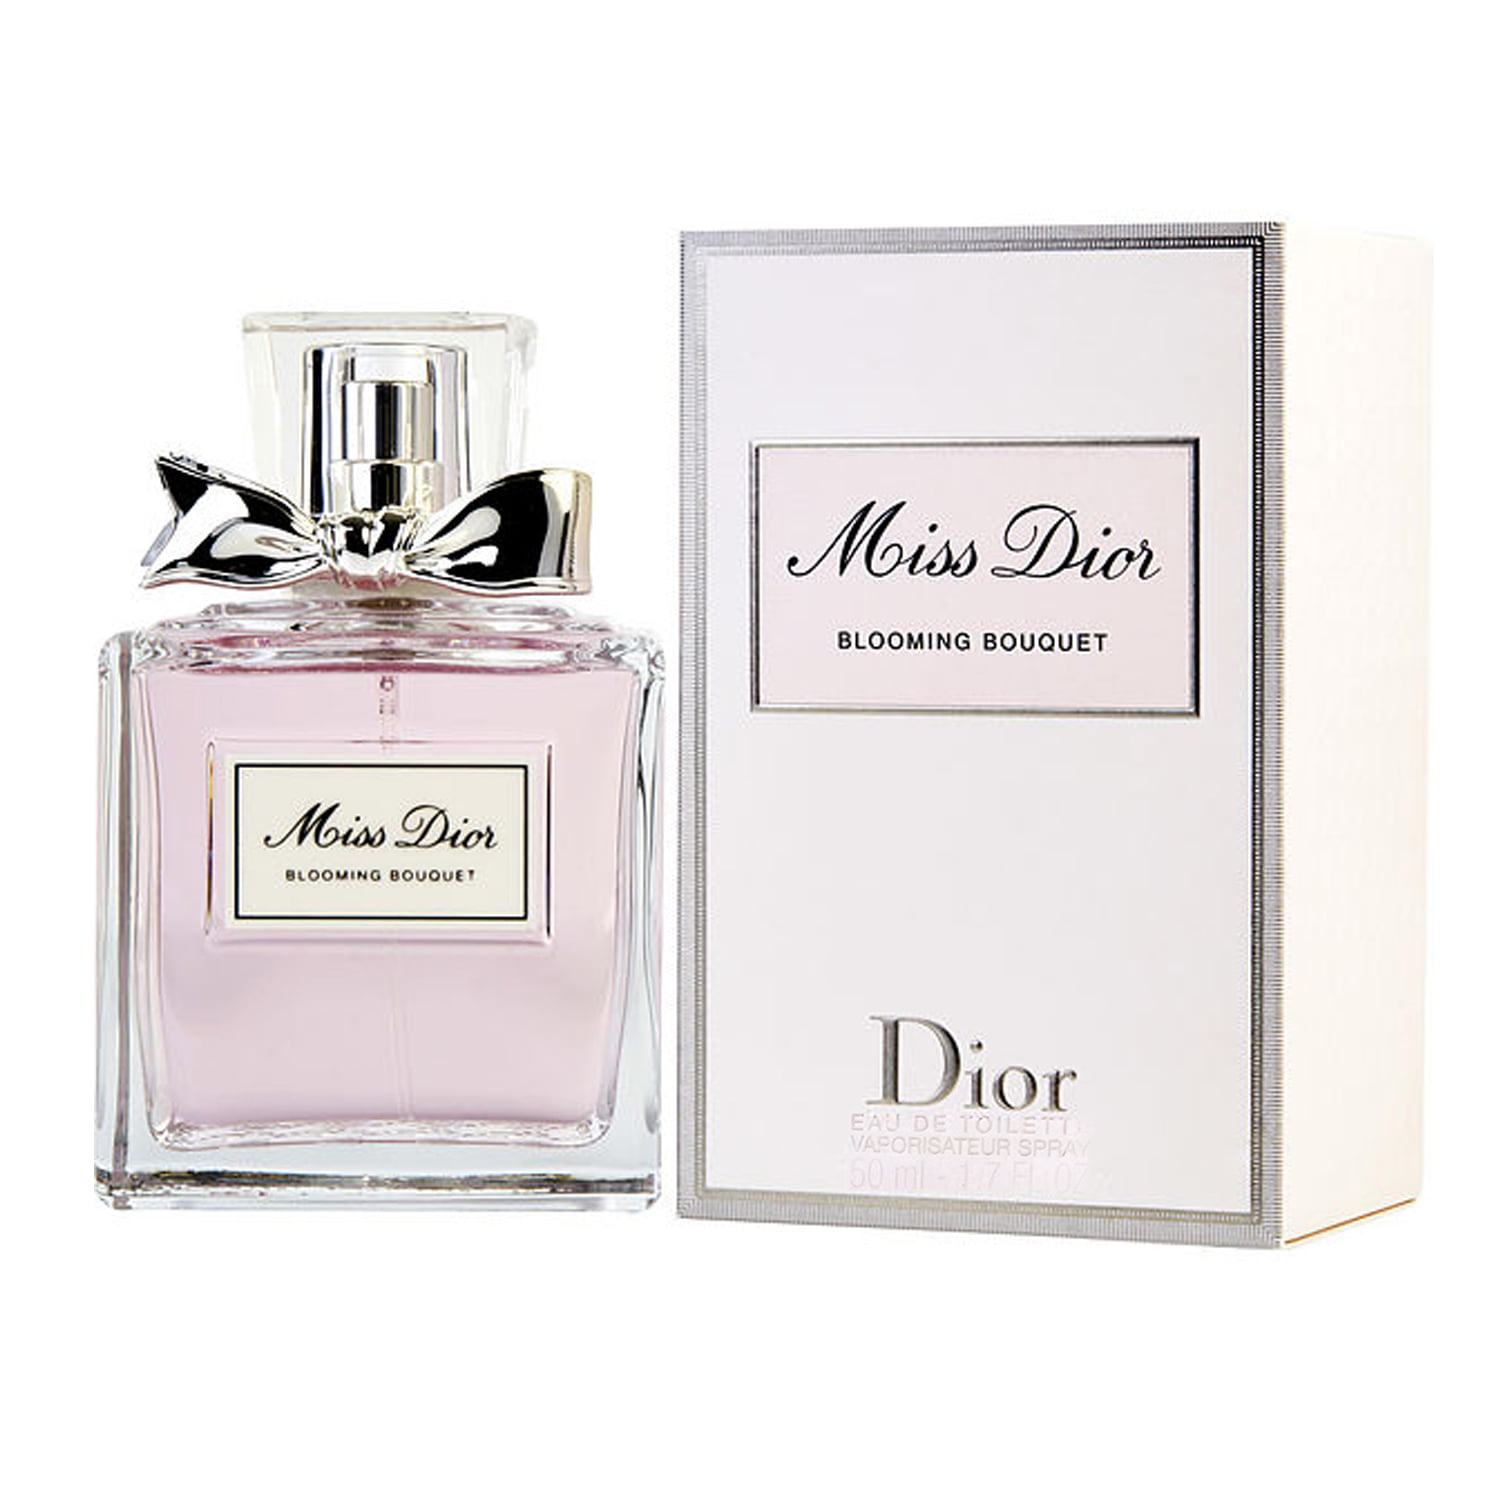 miss dior blooming bouquet 1.7 oz